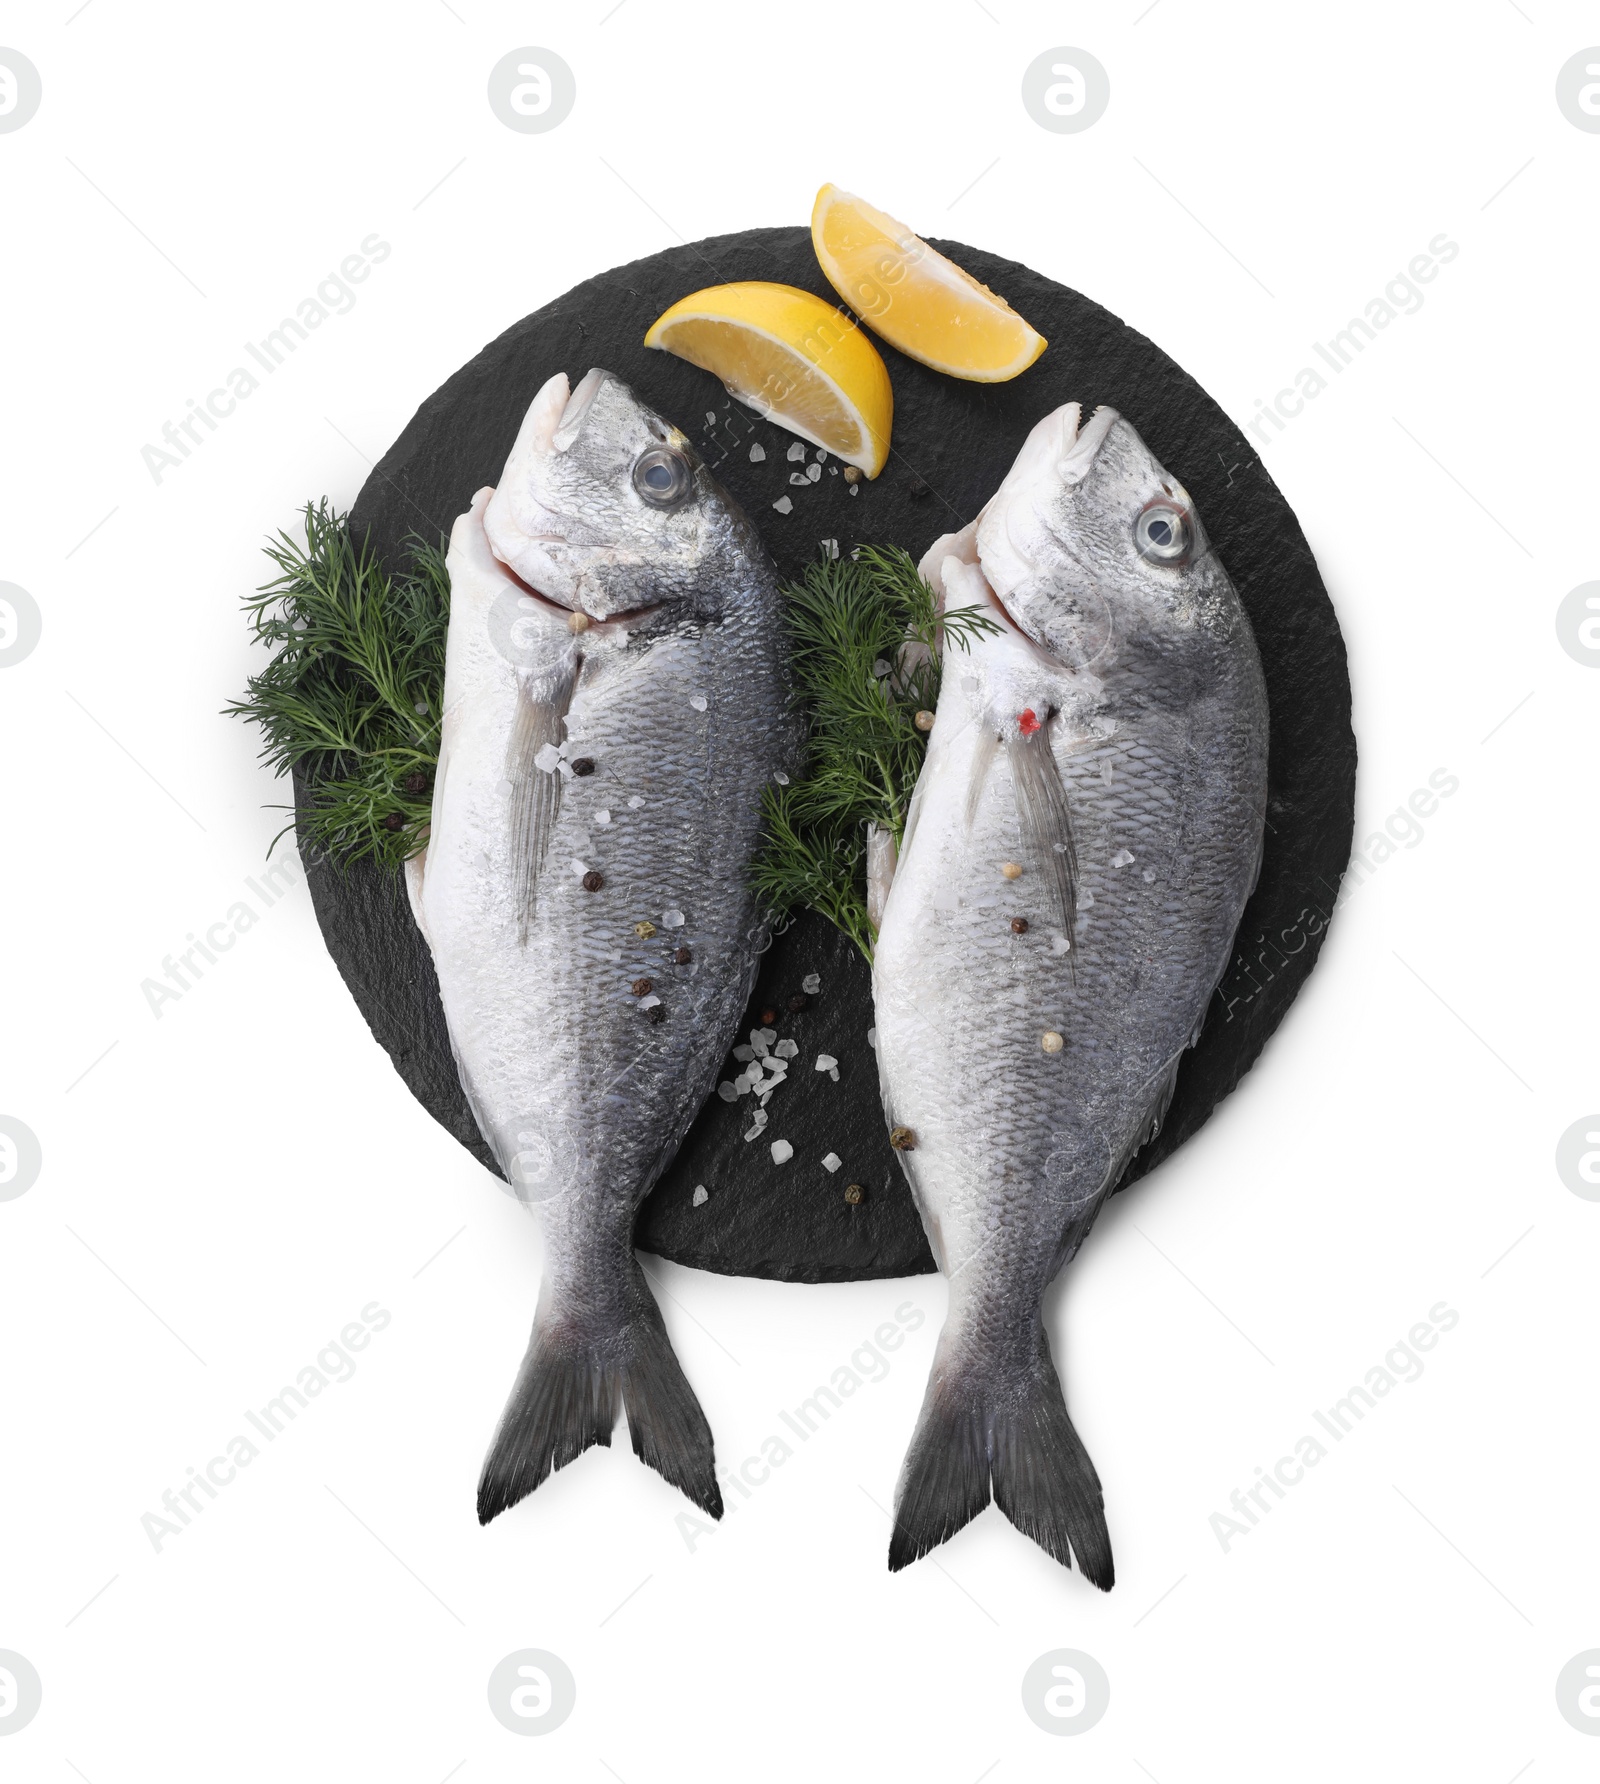 Photo of Raw dorado fish, dill, lemon wedges and peppercorns isolated on white, top view